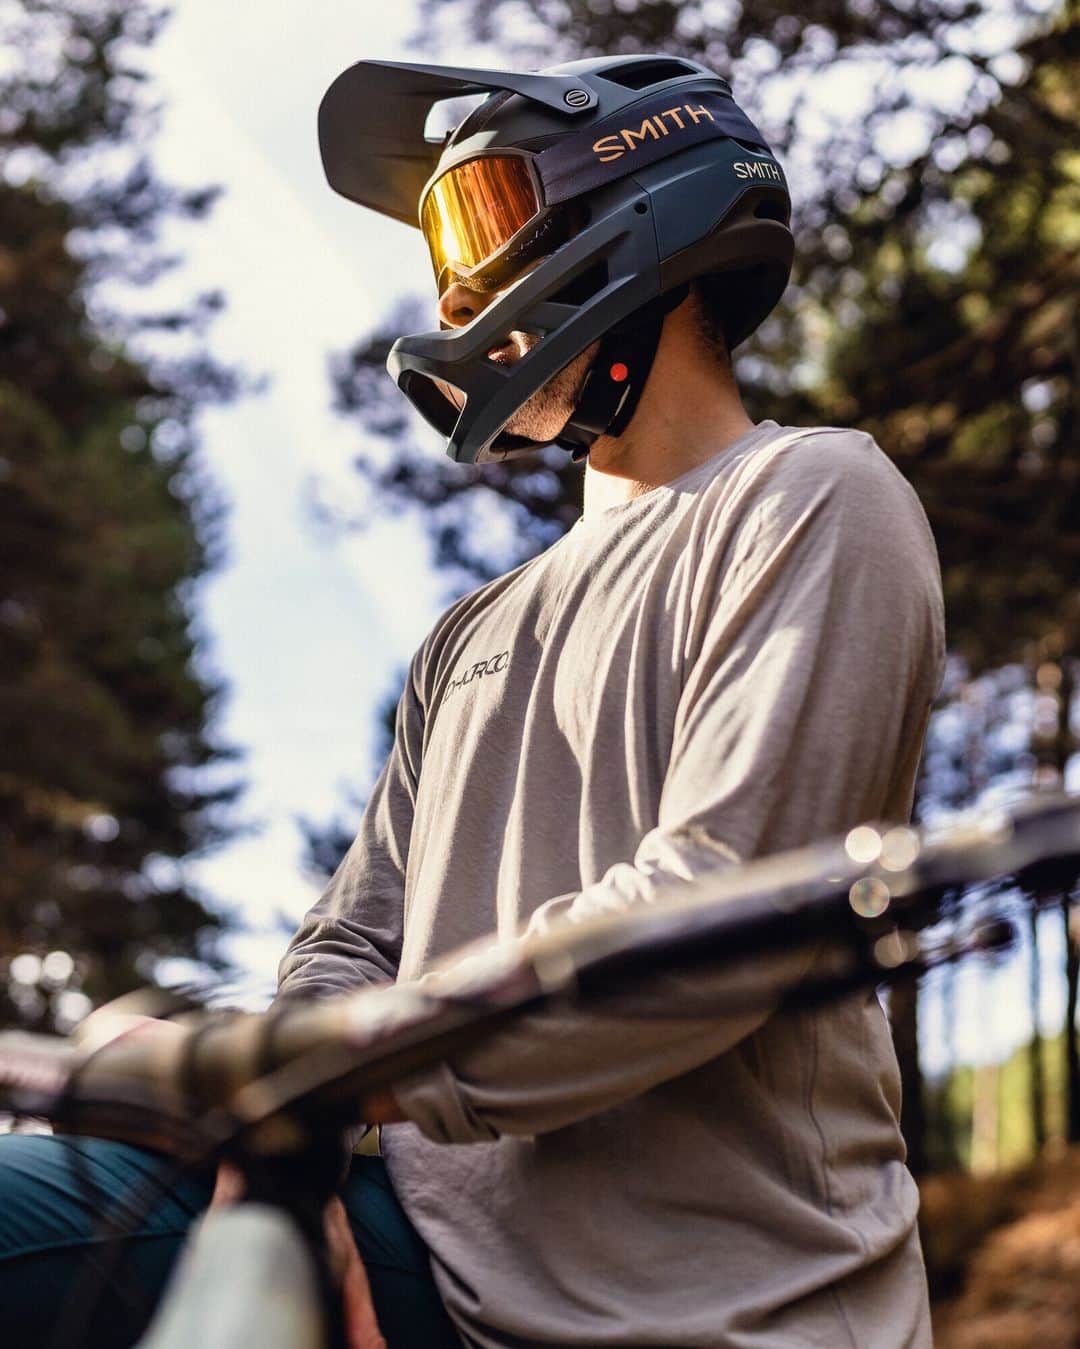 Smithのインスタグラム：「Riders, meet Loam MTB 🤝  Loam is designed to deliver top-notch performance without breaking the bank. Built out with a durable frame, fog-resistant lenses, and a low nose bridge for an excellent field of vision, they provide the perfect balance of protection and affordability. Whether you're starting your mountain biking journey or want to save cash, Loam MTB has you covered.」